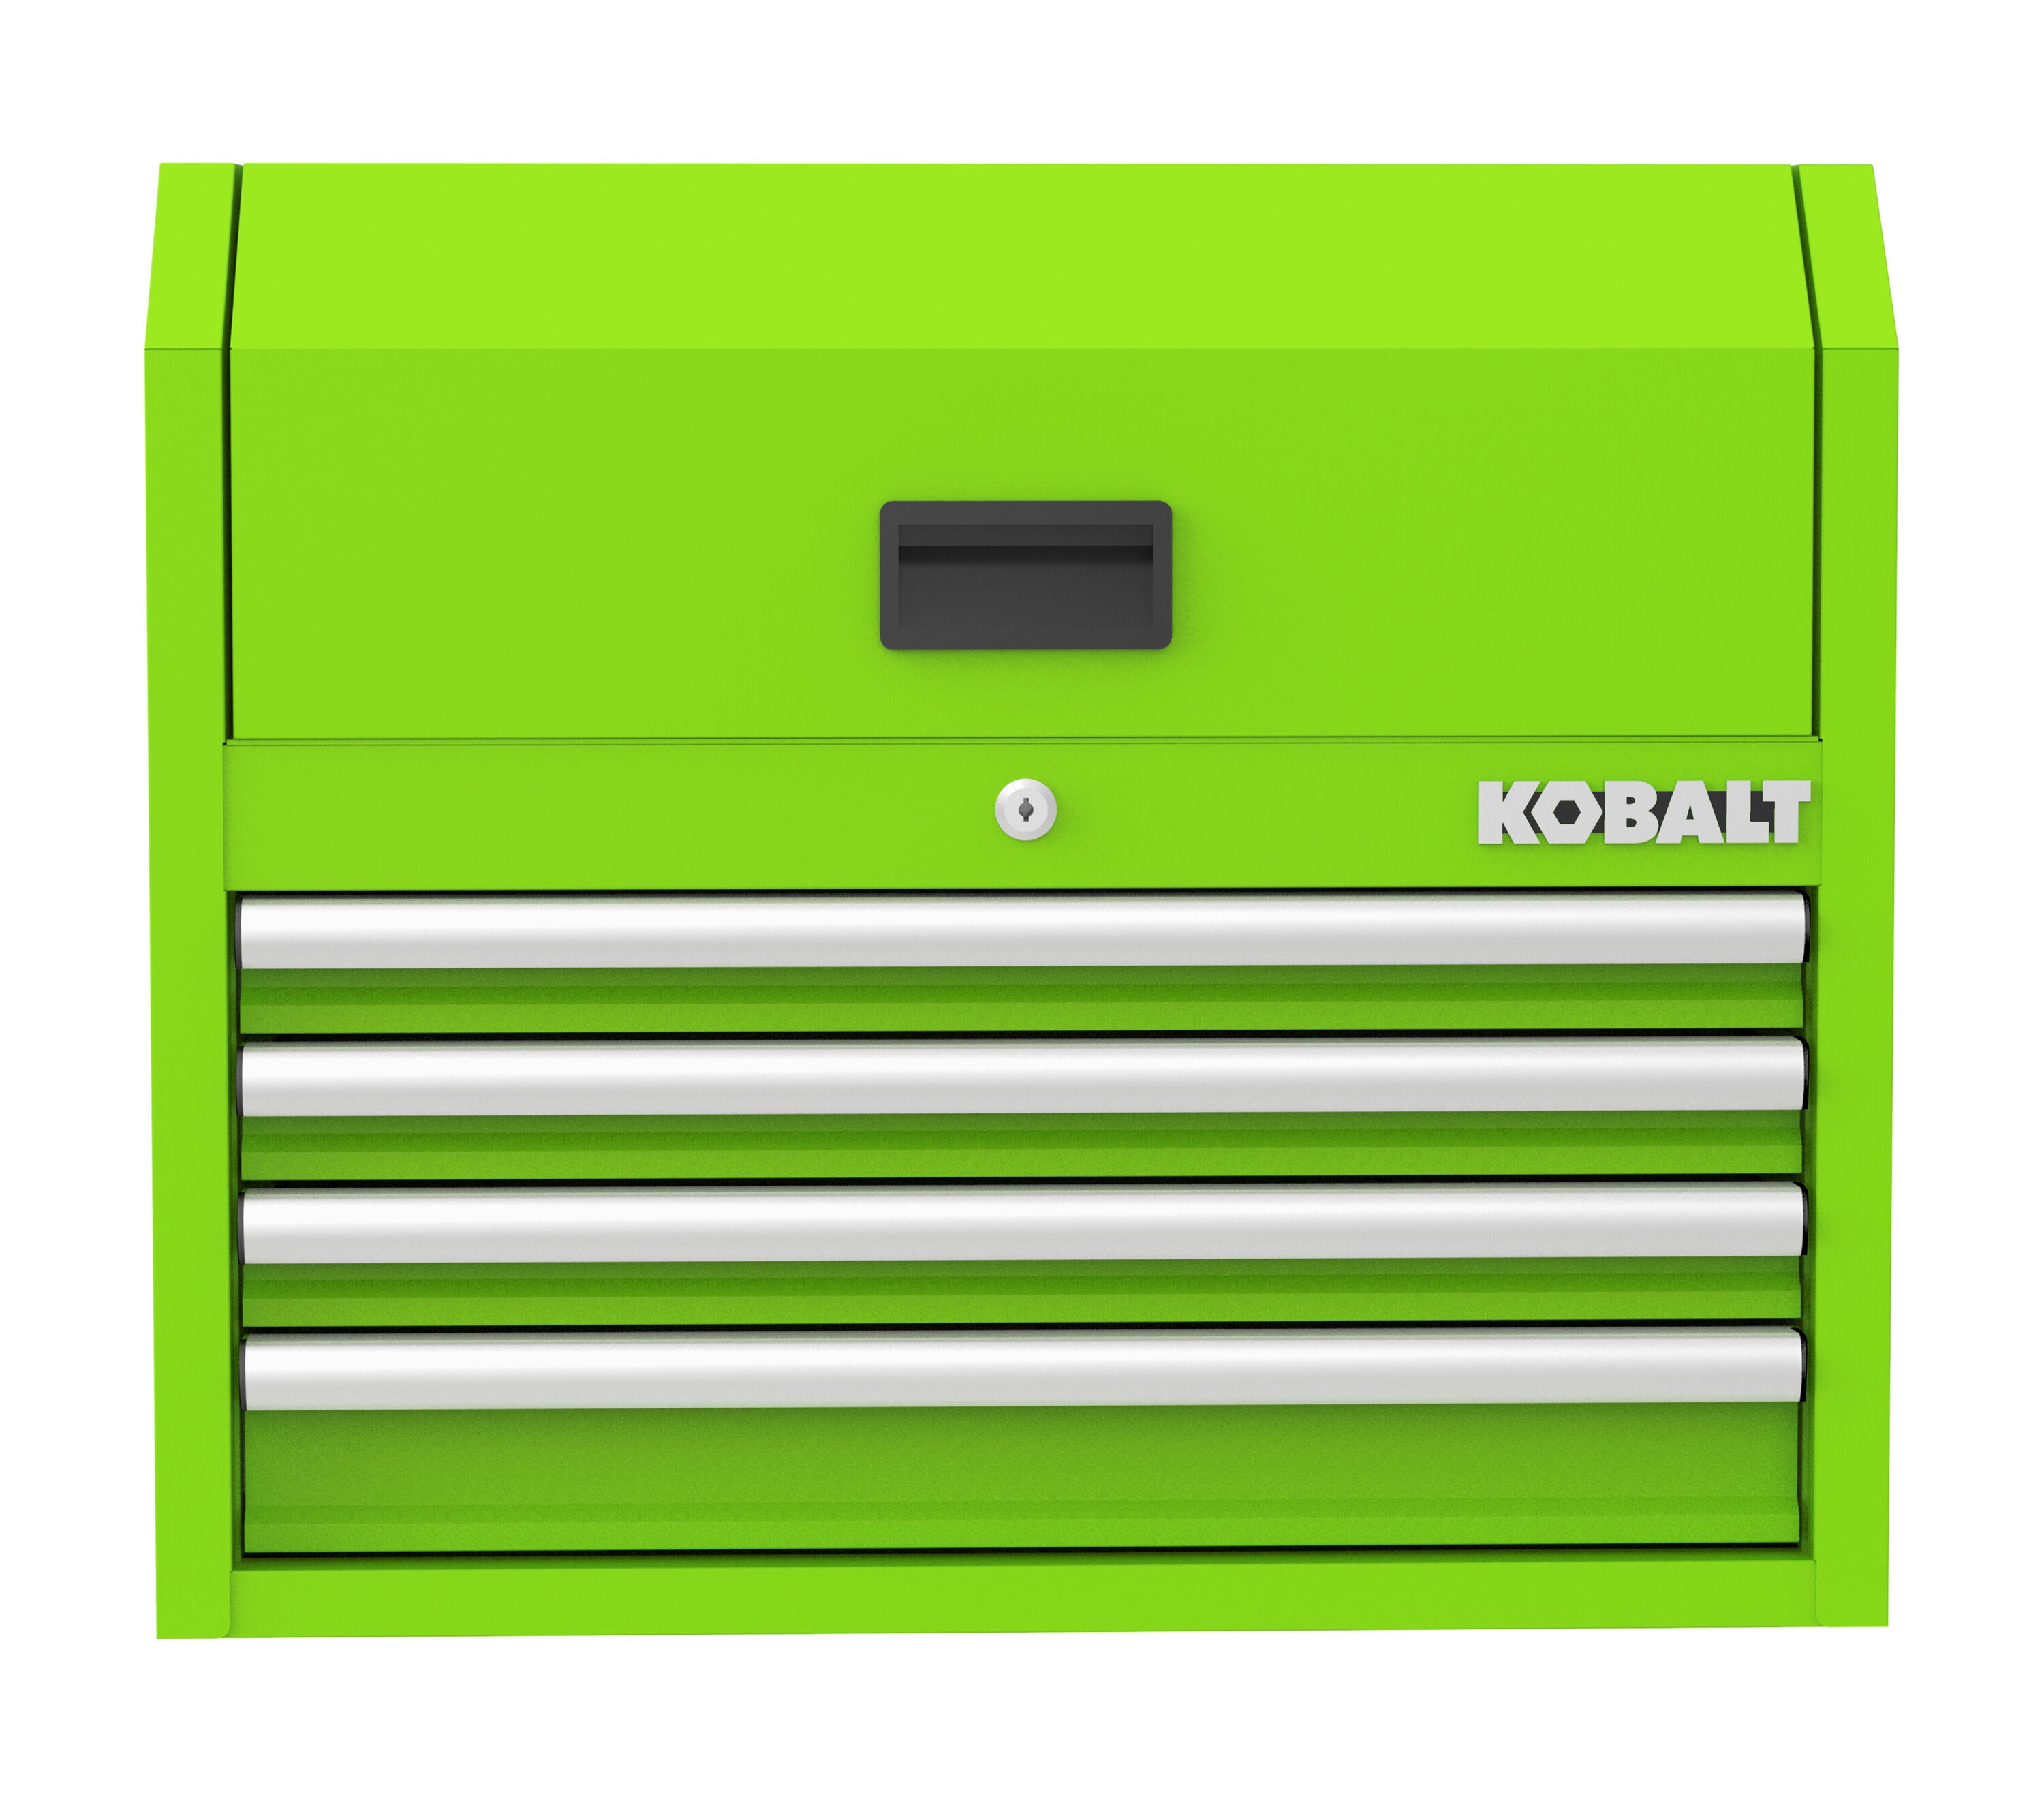 Kobalt 26-in W x 22-in H 4-Drawer Steel Tool Chest (Green) in the